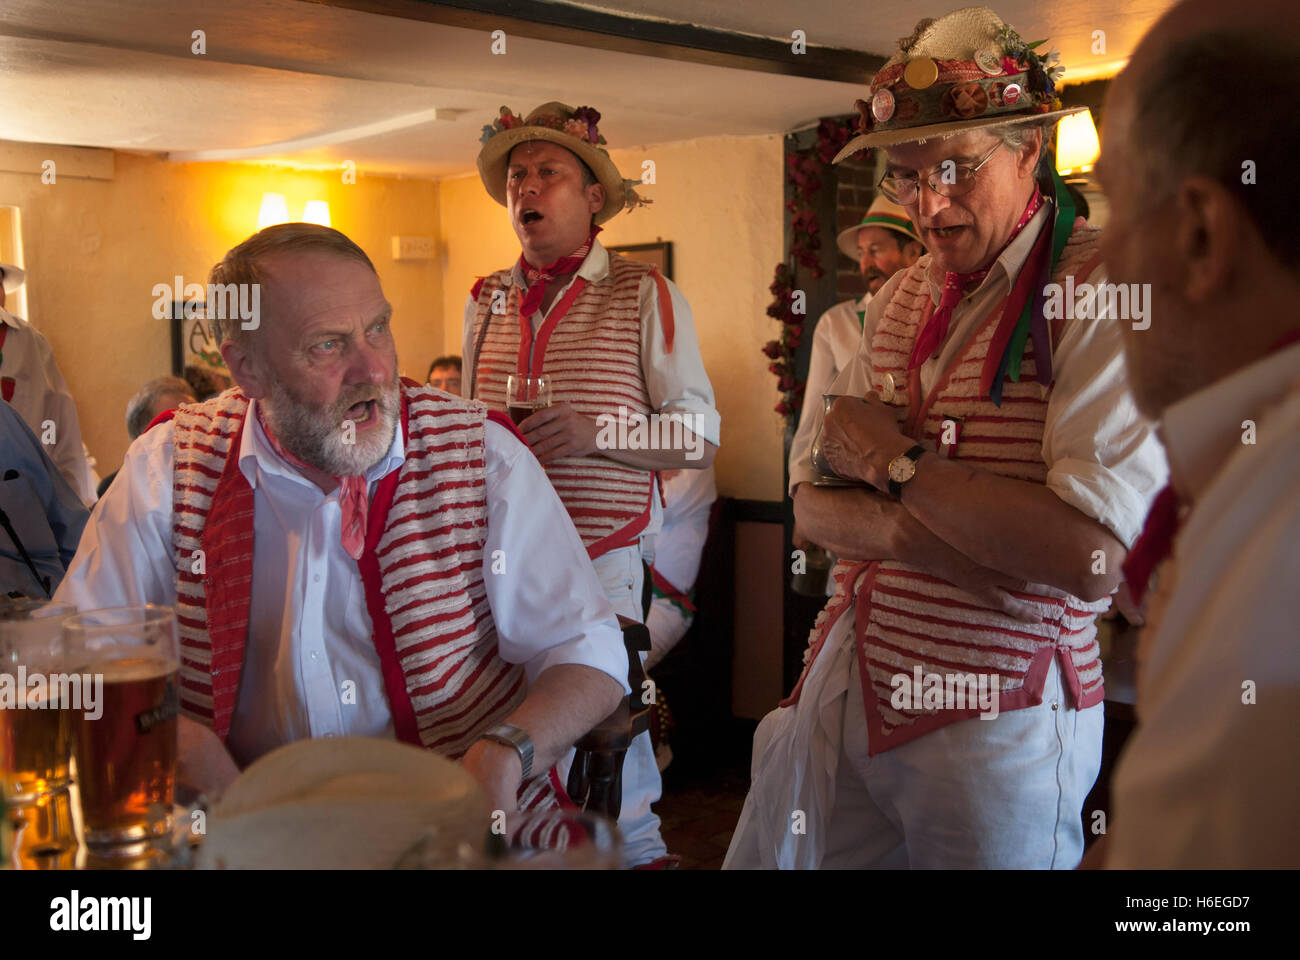 Village Pub Uk interior people. Morris men relaxing during a break from their dancing. Singing traditional folk songs,  Thaxted Essex 2000s HOMER SYKES Stock Photo